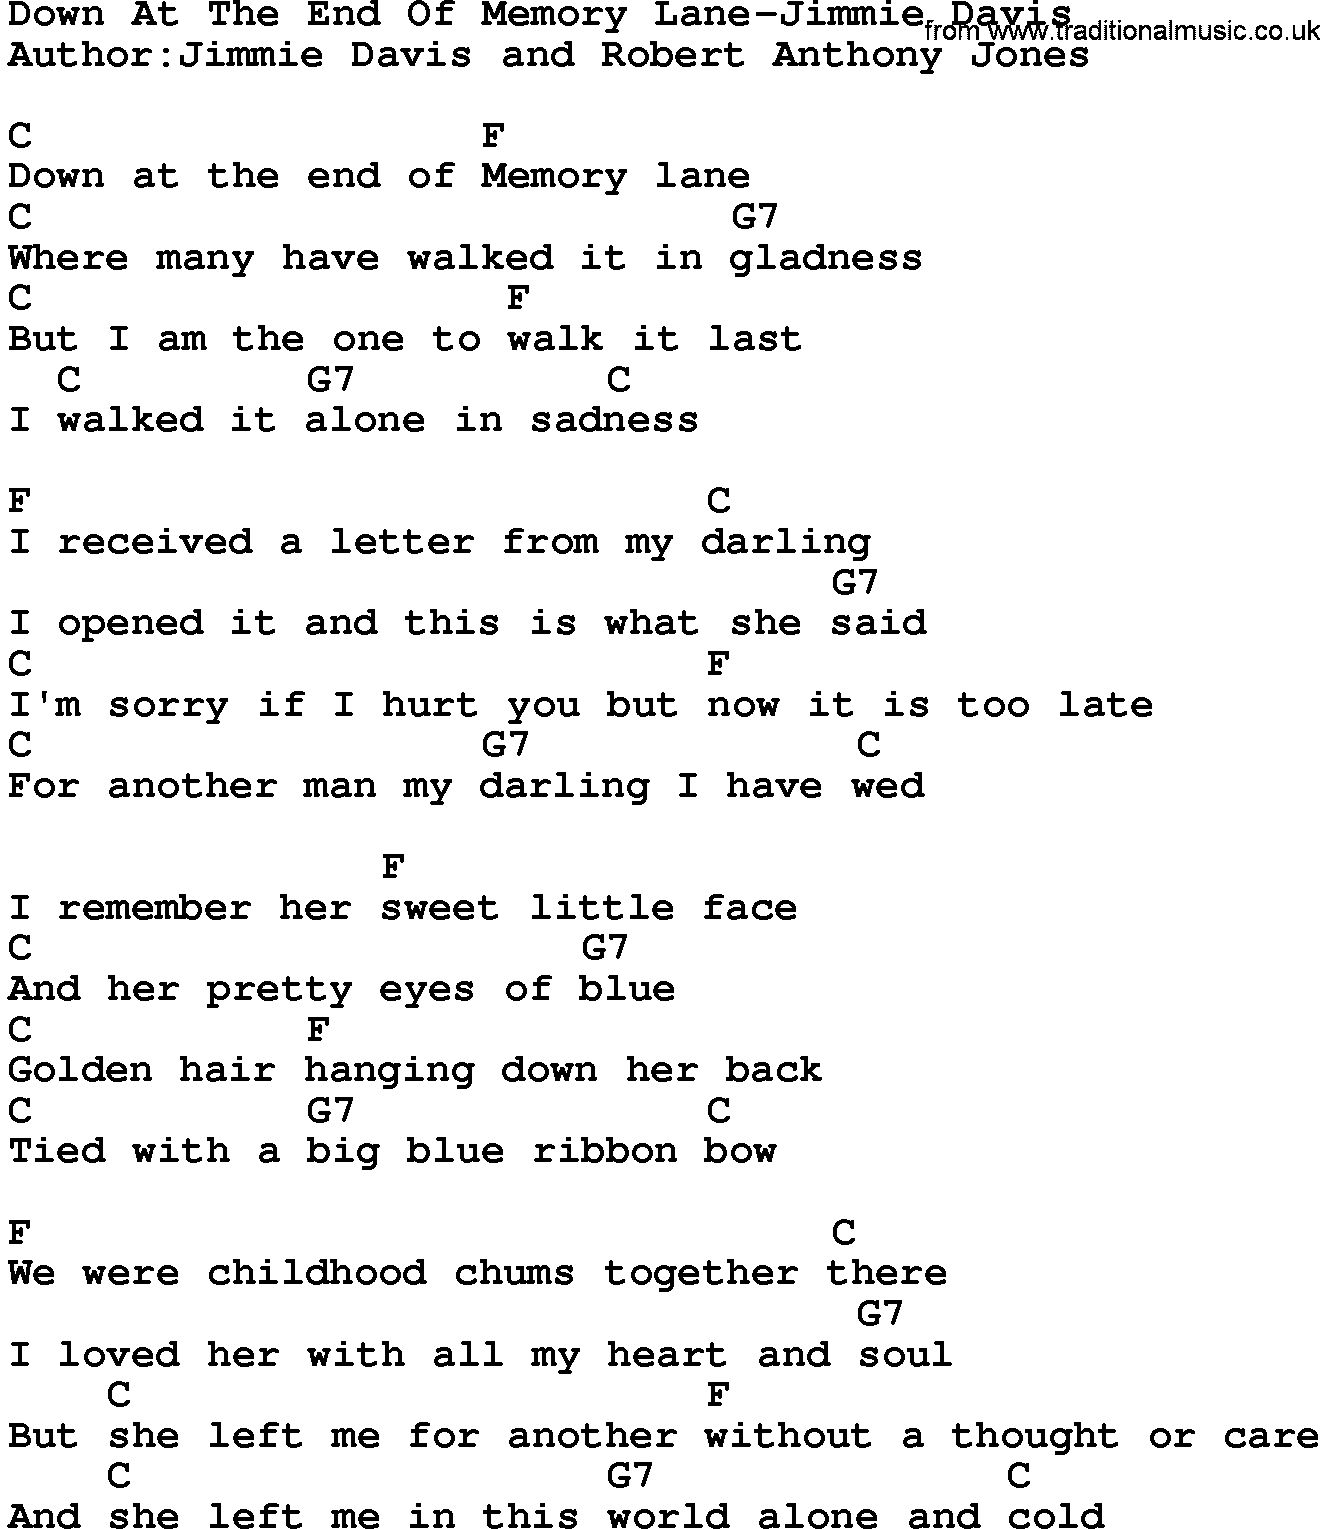 Country music song: Down At The End Of Memory Lane-Jimmie Davis lyrics and chords